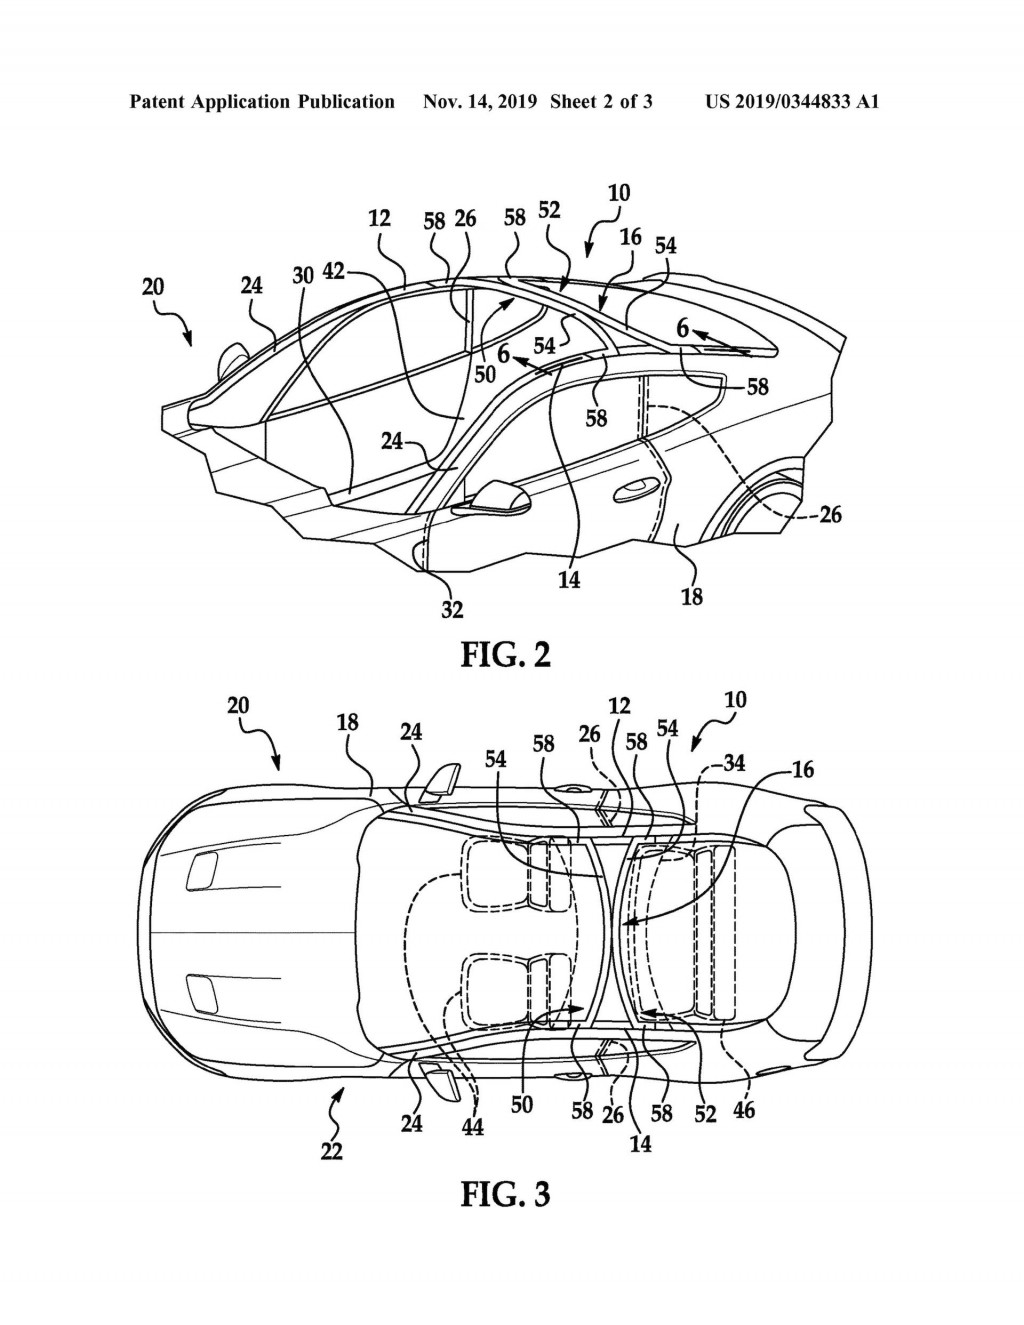 Ford vehicle roof patent